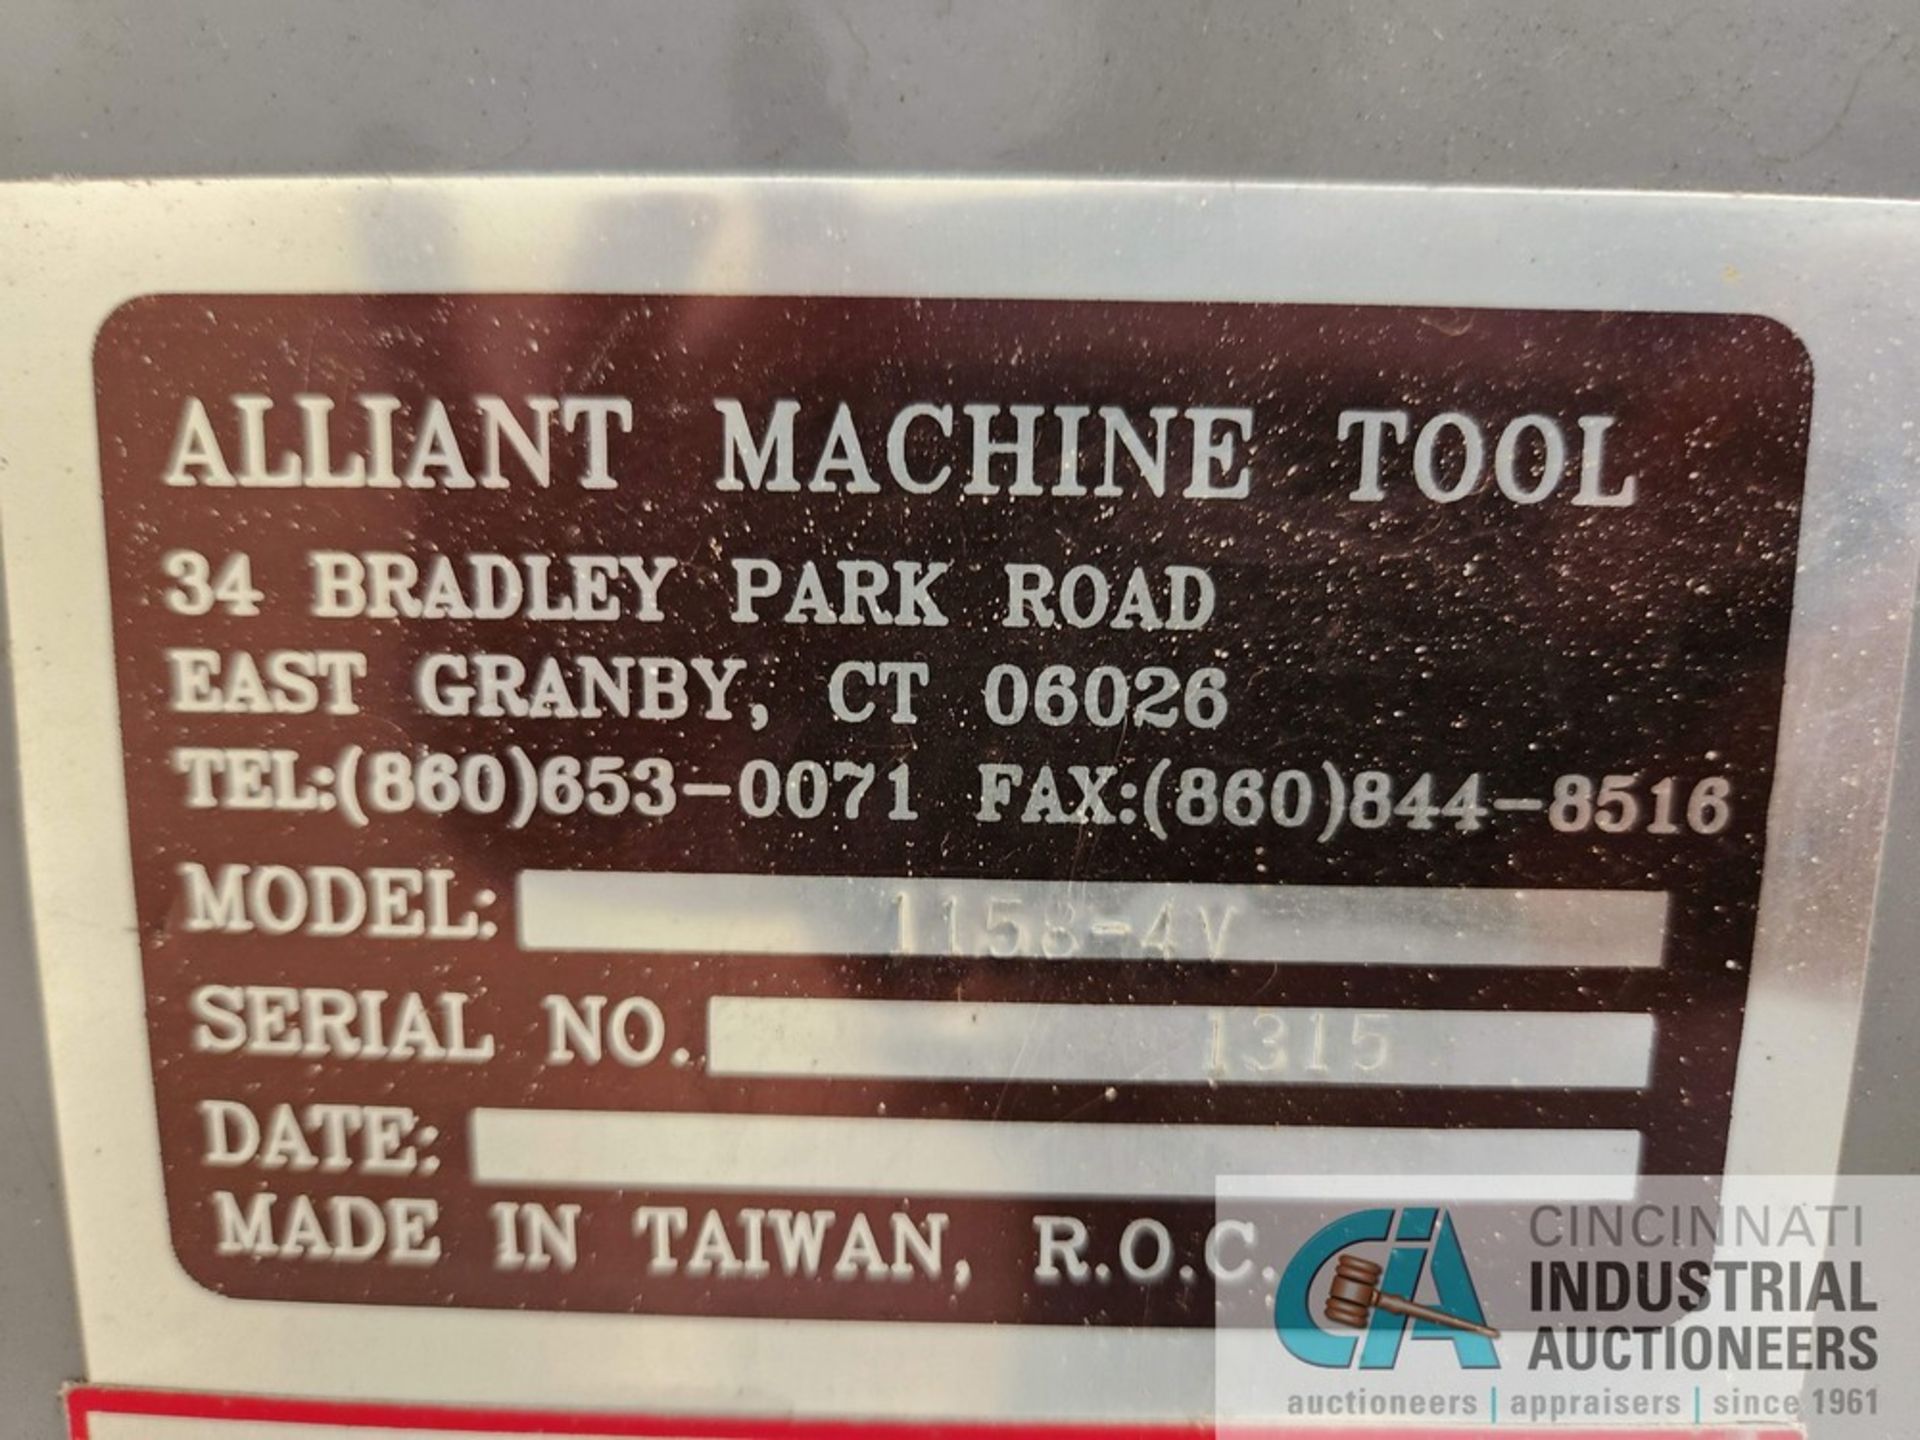 4 HP ALLIANT MODEL 1158-4V VERTICAL MILL; S/N 1315, 11" X 58" TABLE, POWER DRAW BAR, NEWALL DRO, - Image 10 of 10